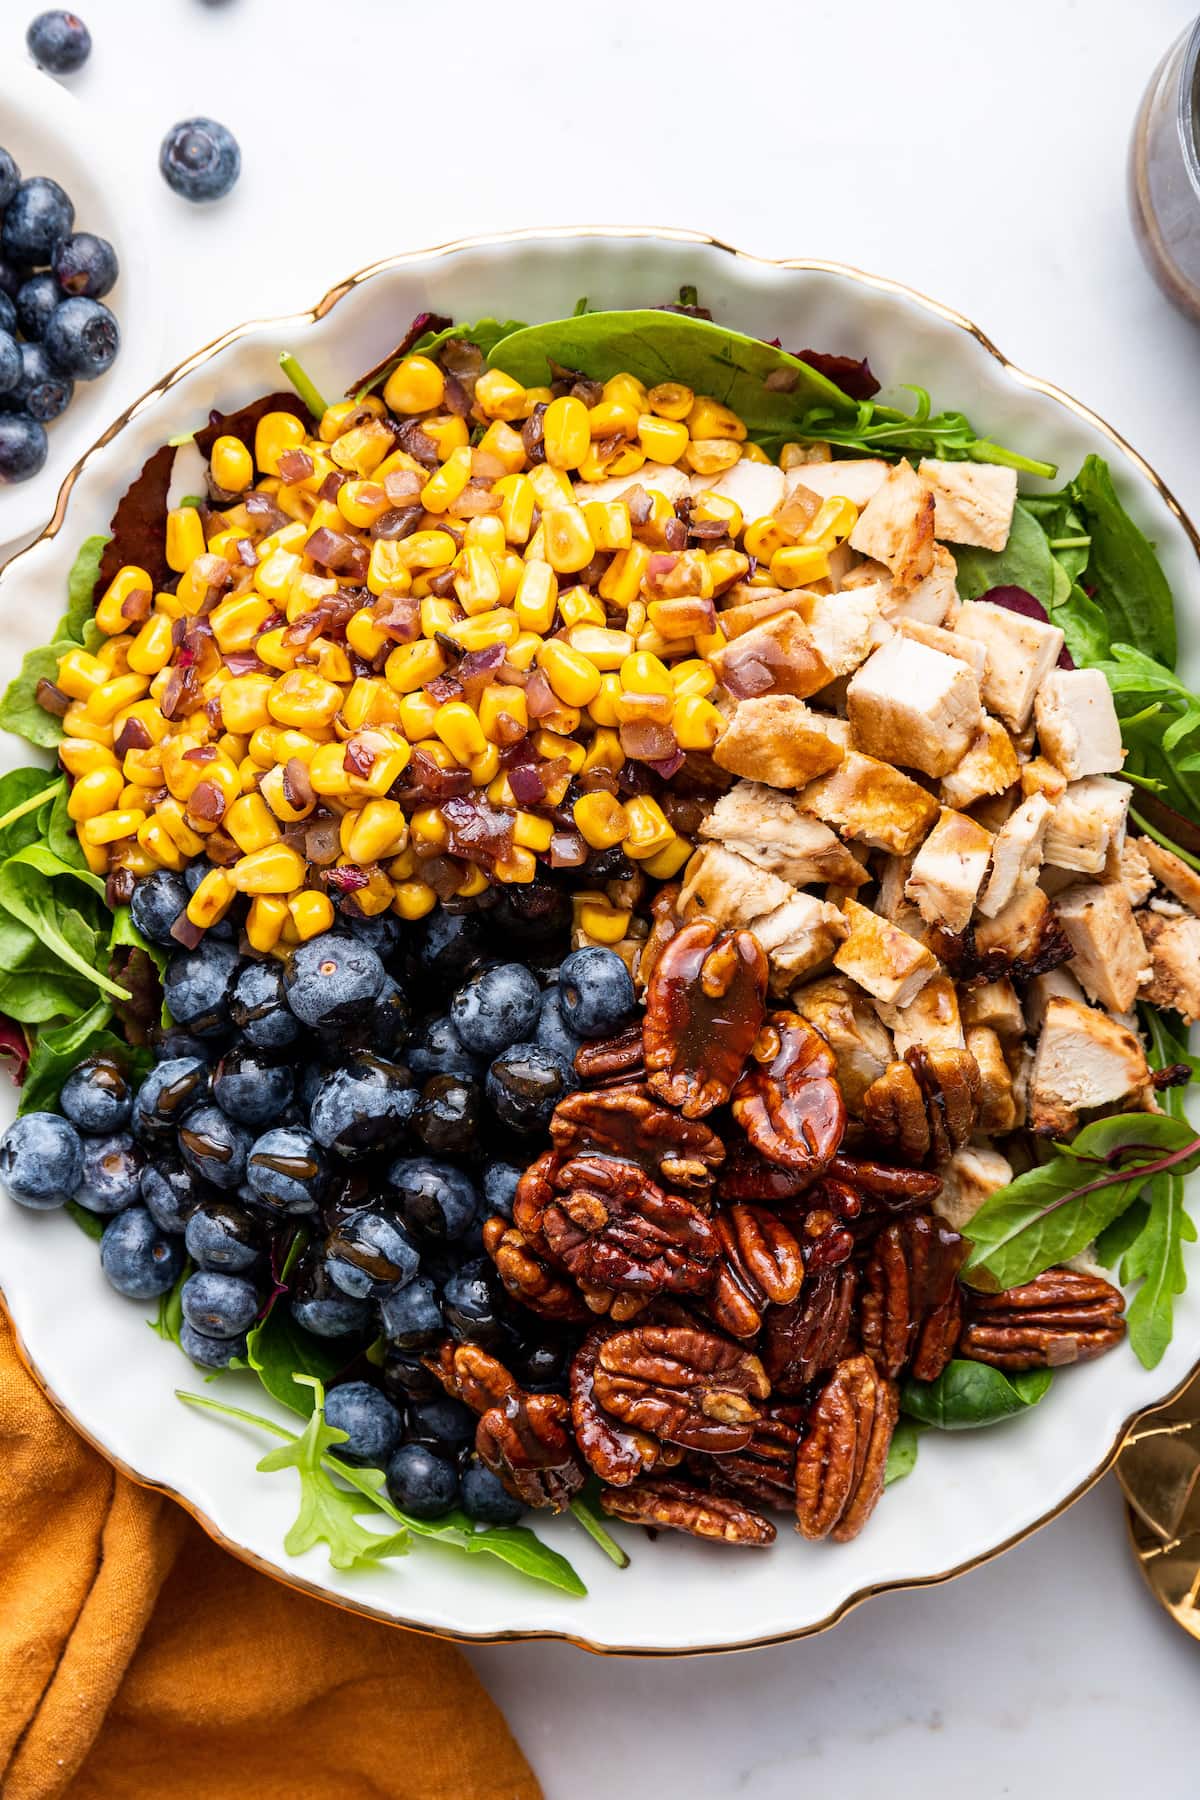 Ingredients for the blueberry corn chicken salad served over a bed of greens.